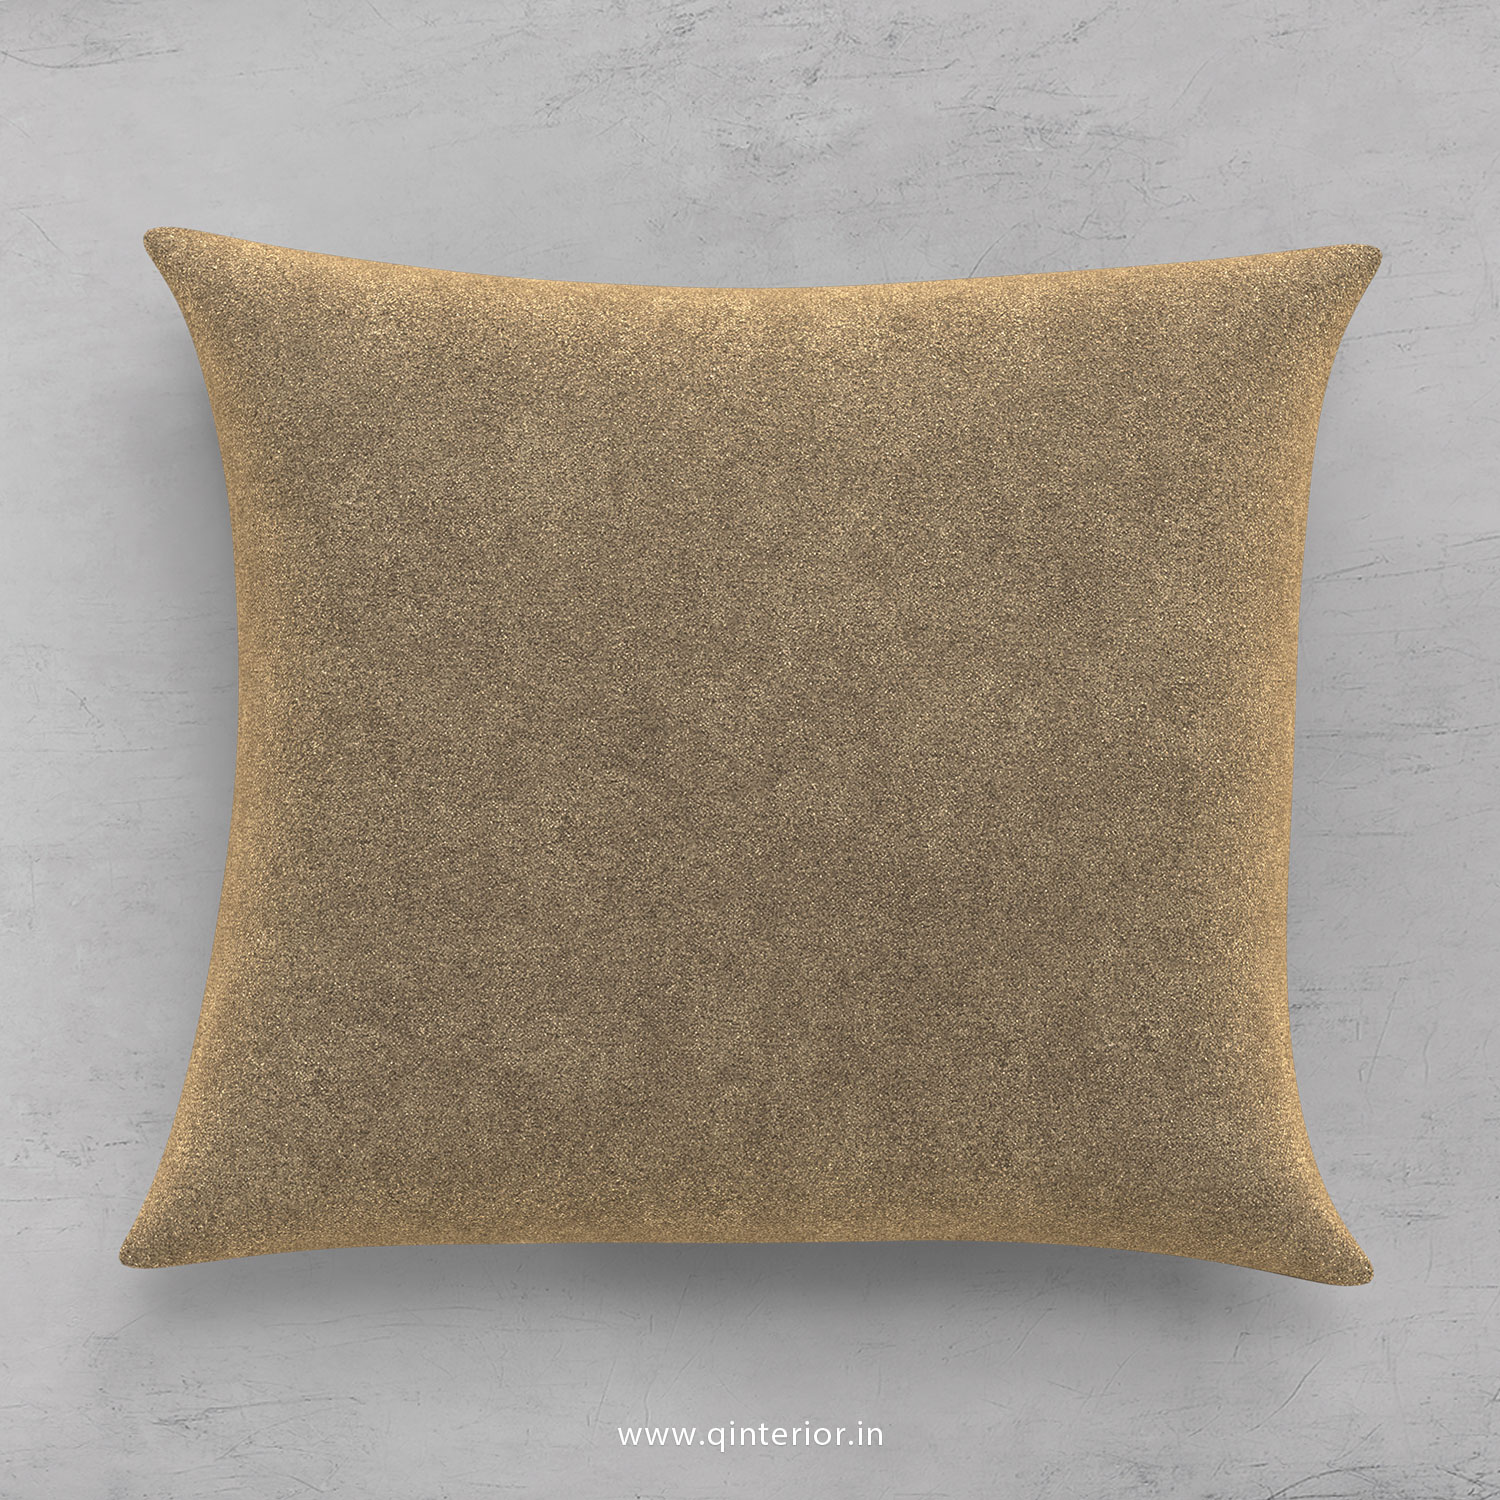 Cushion With Cushion Cover in Fab Leather - CUS001 FL06